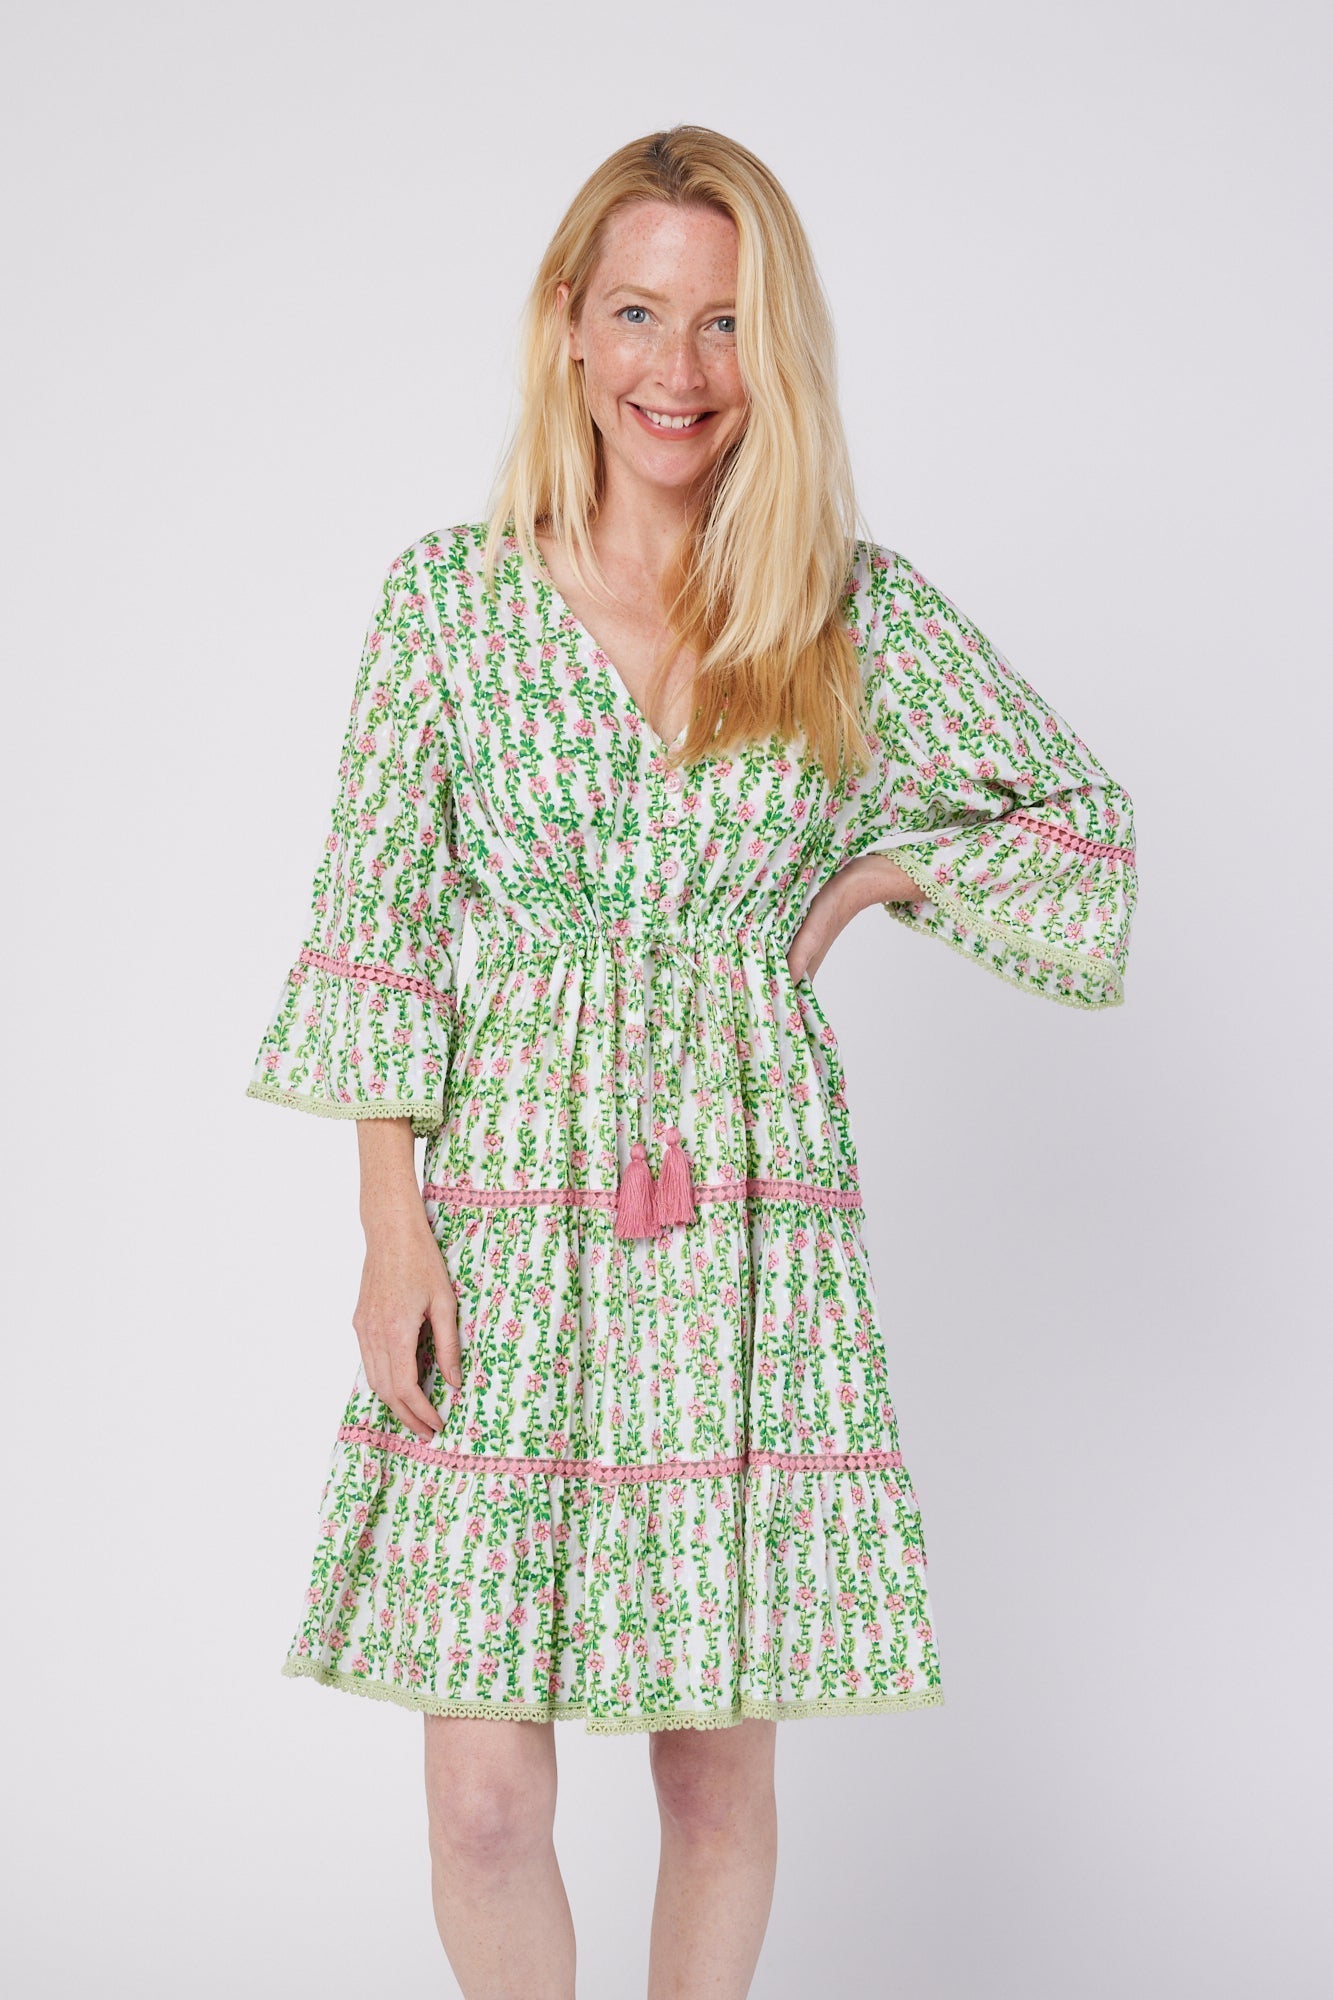 ModaPosa Desideria 3/4 Frill Sleeve Drawstring Empire Knee Length Dress in Spring Garden . Discover women's resort dresses and lifestyle clothing inspired by the Mediterranean. Free worldwide shipping available!